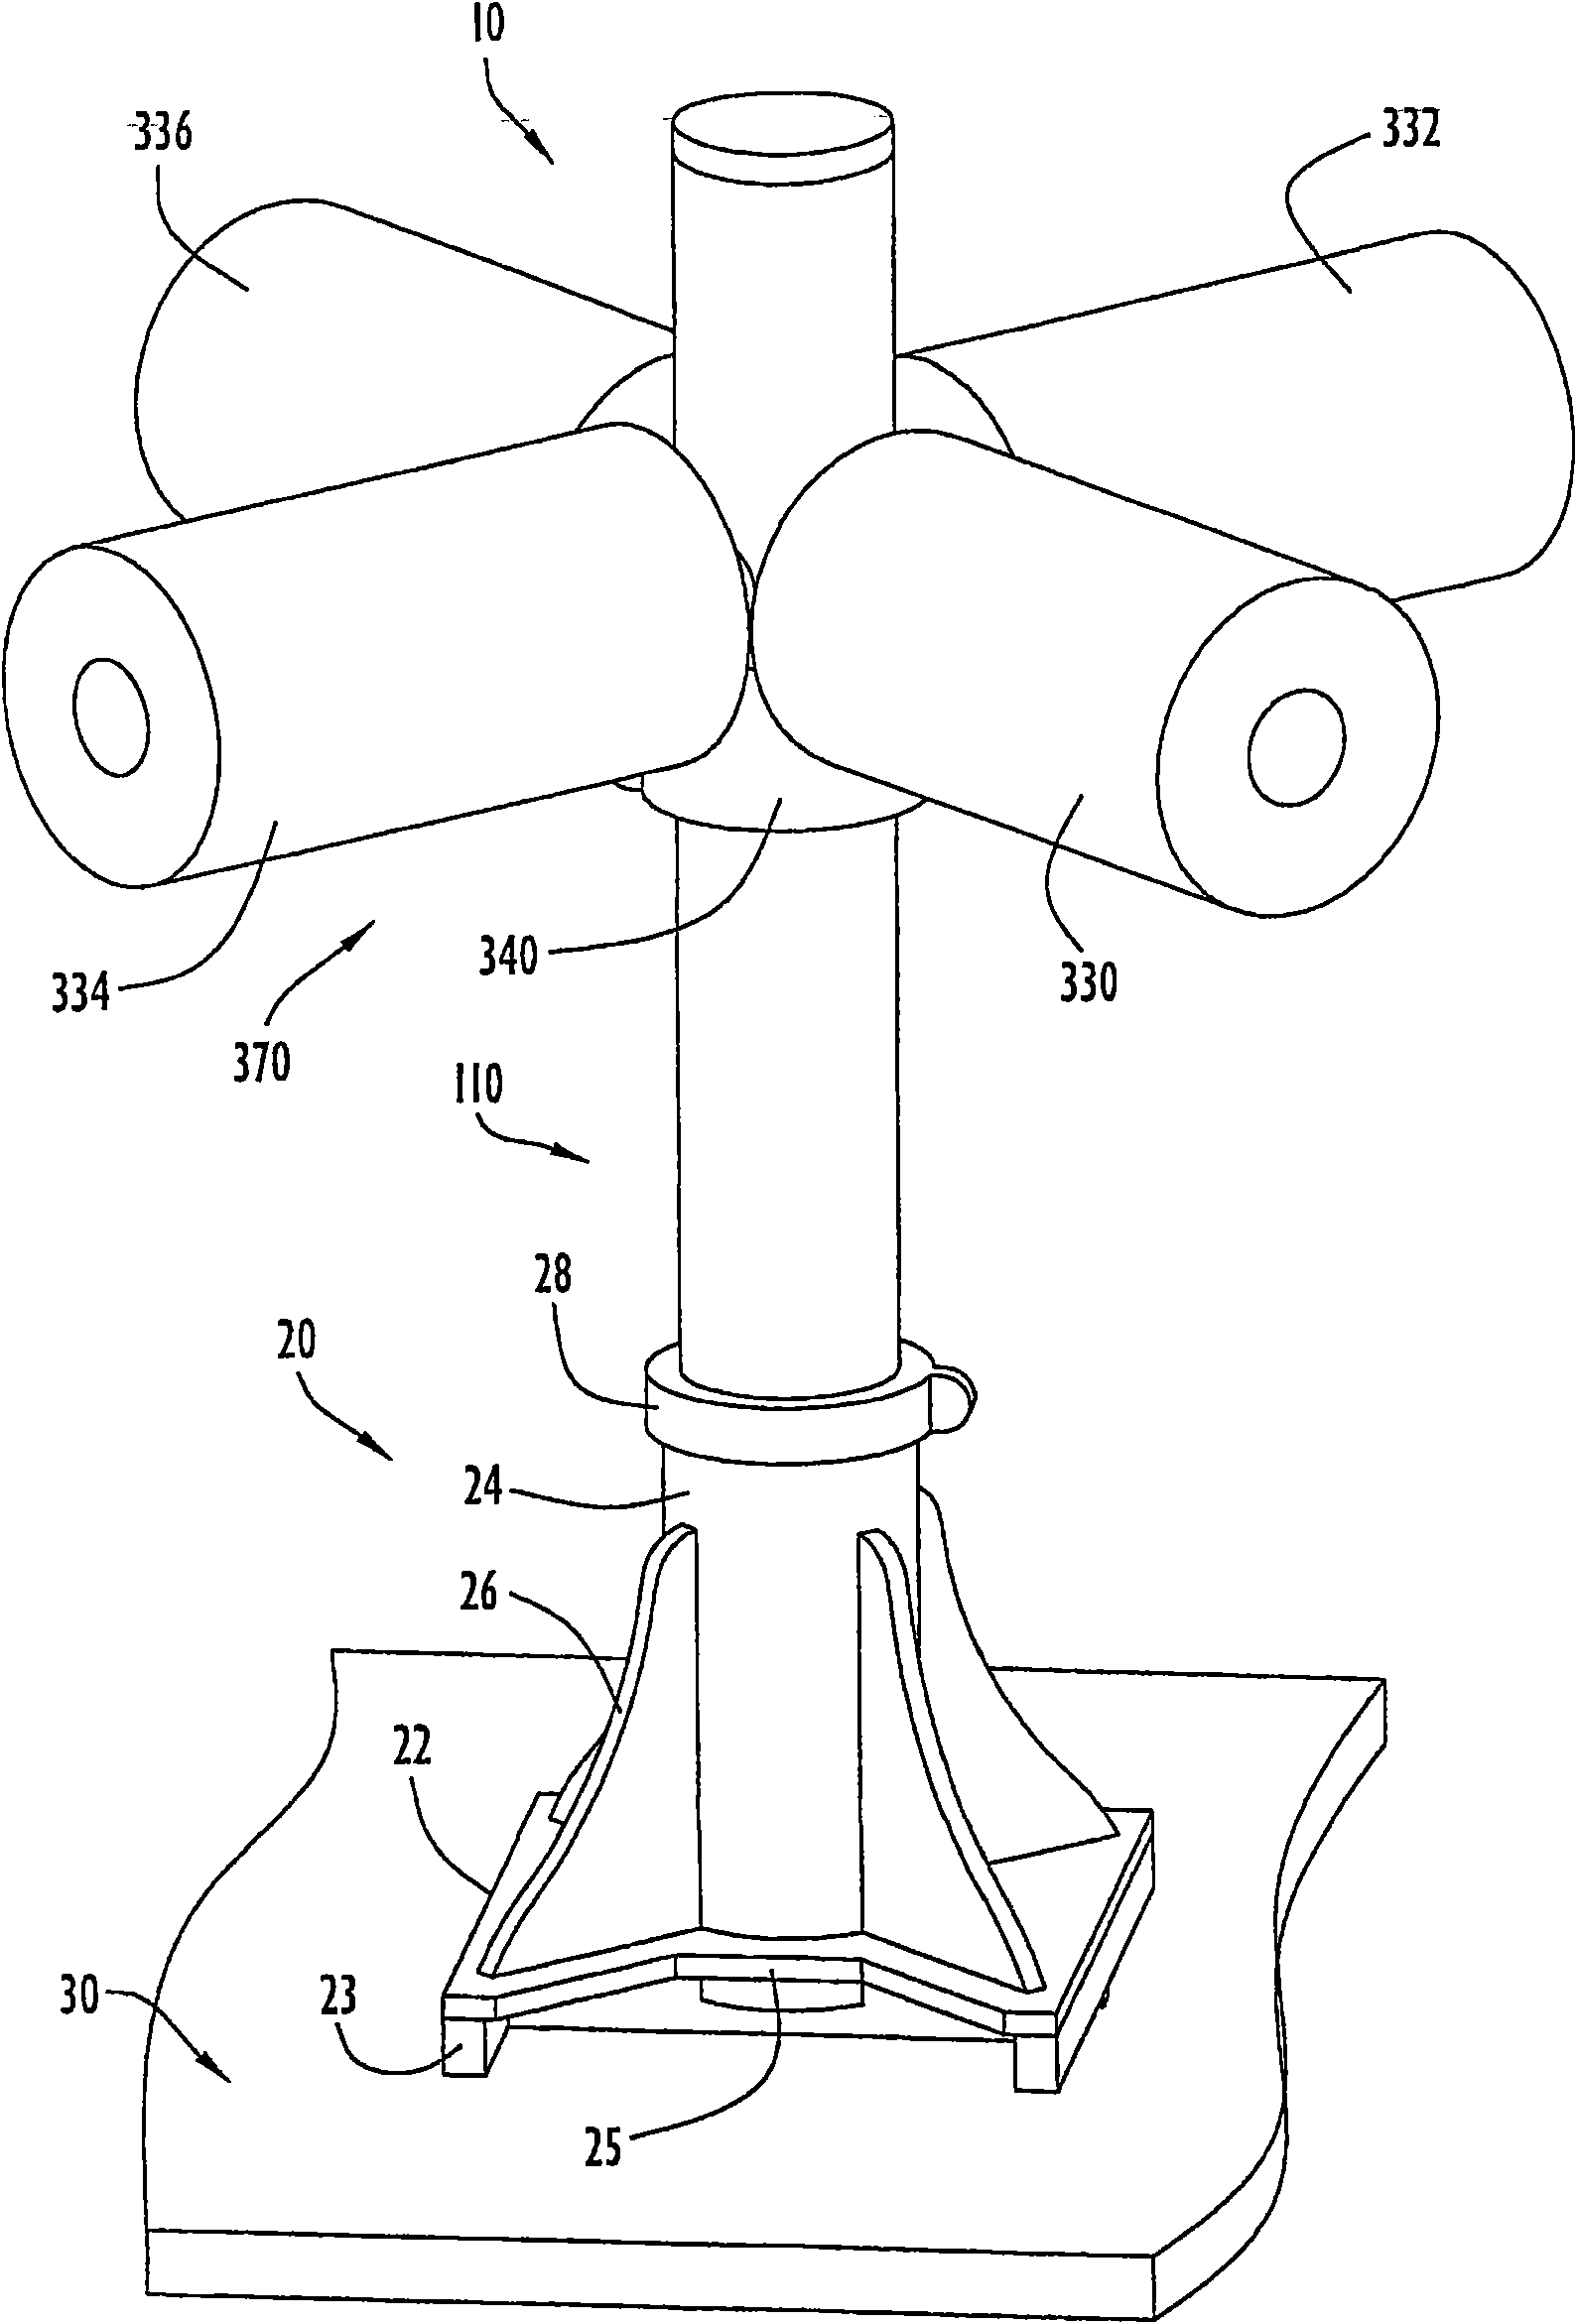 Method and apparatus for operatively controlling a virtual reality scenario with an isometric exercise system